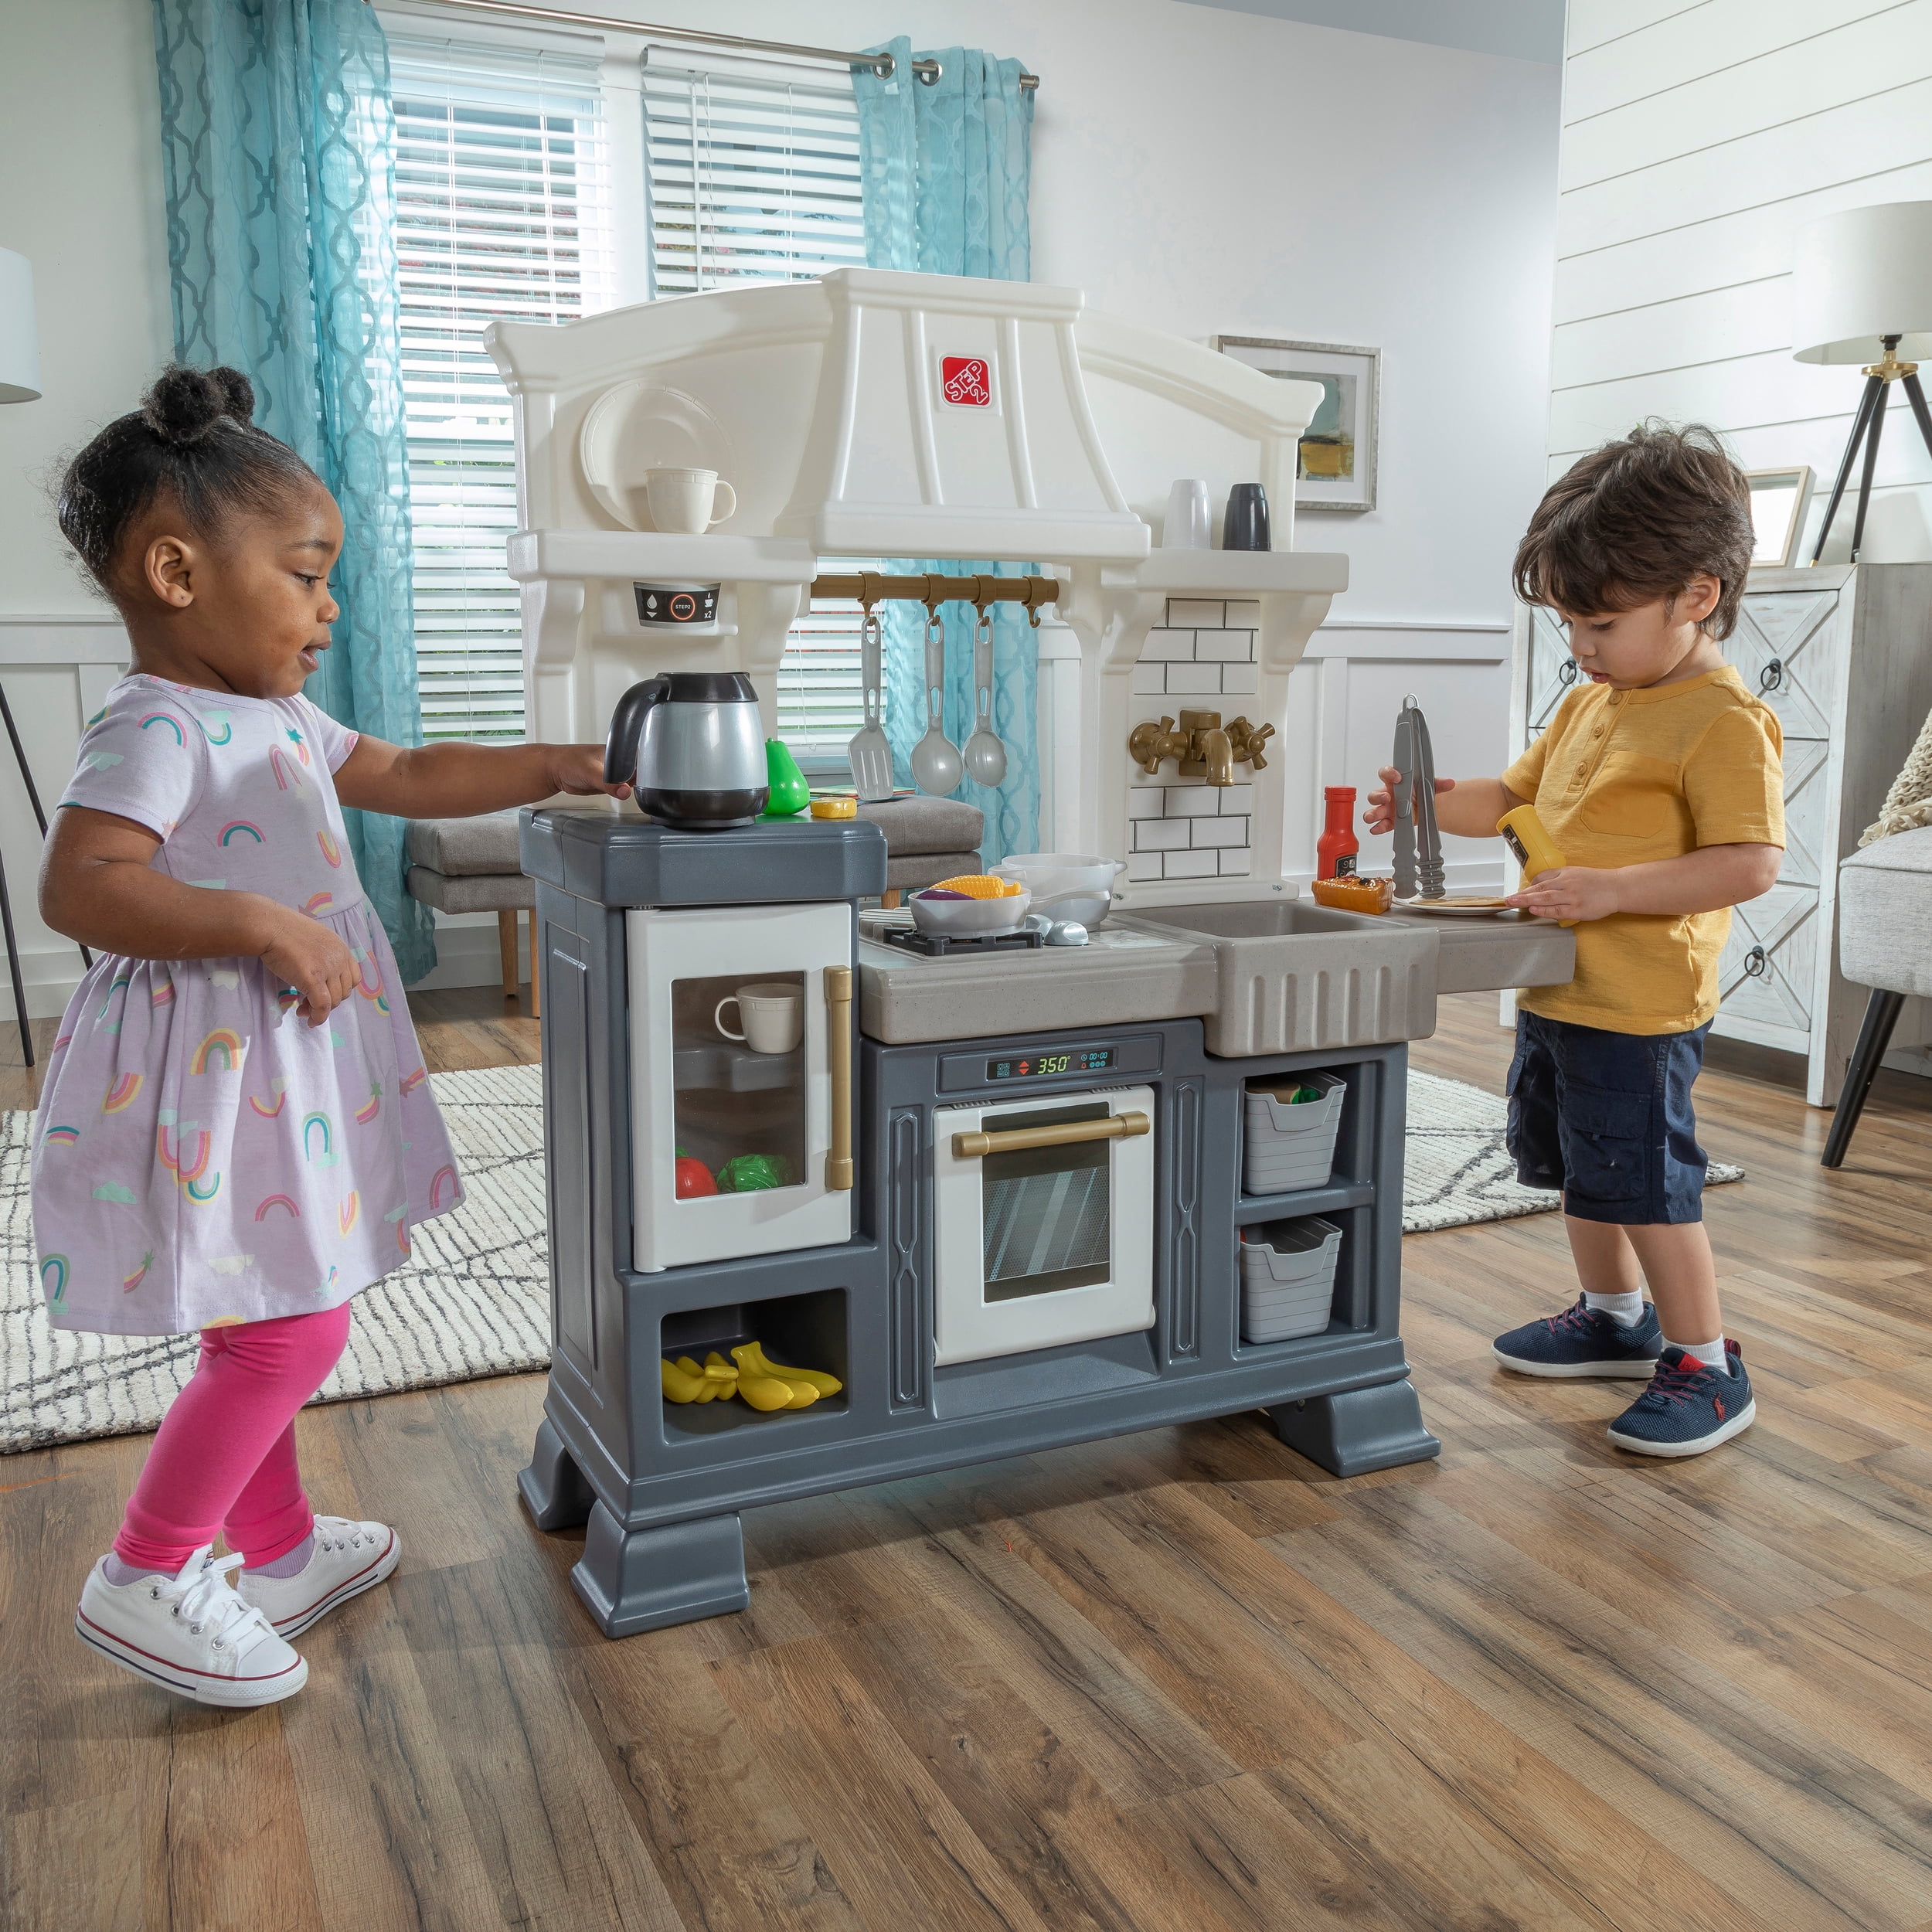 Step2 Gilded Gourmet Kitchen Playset For Kids Includes 20 Plus Toy Kitchen  Accessories Interactive Features For Realistic Pretend Play White Blue Gray